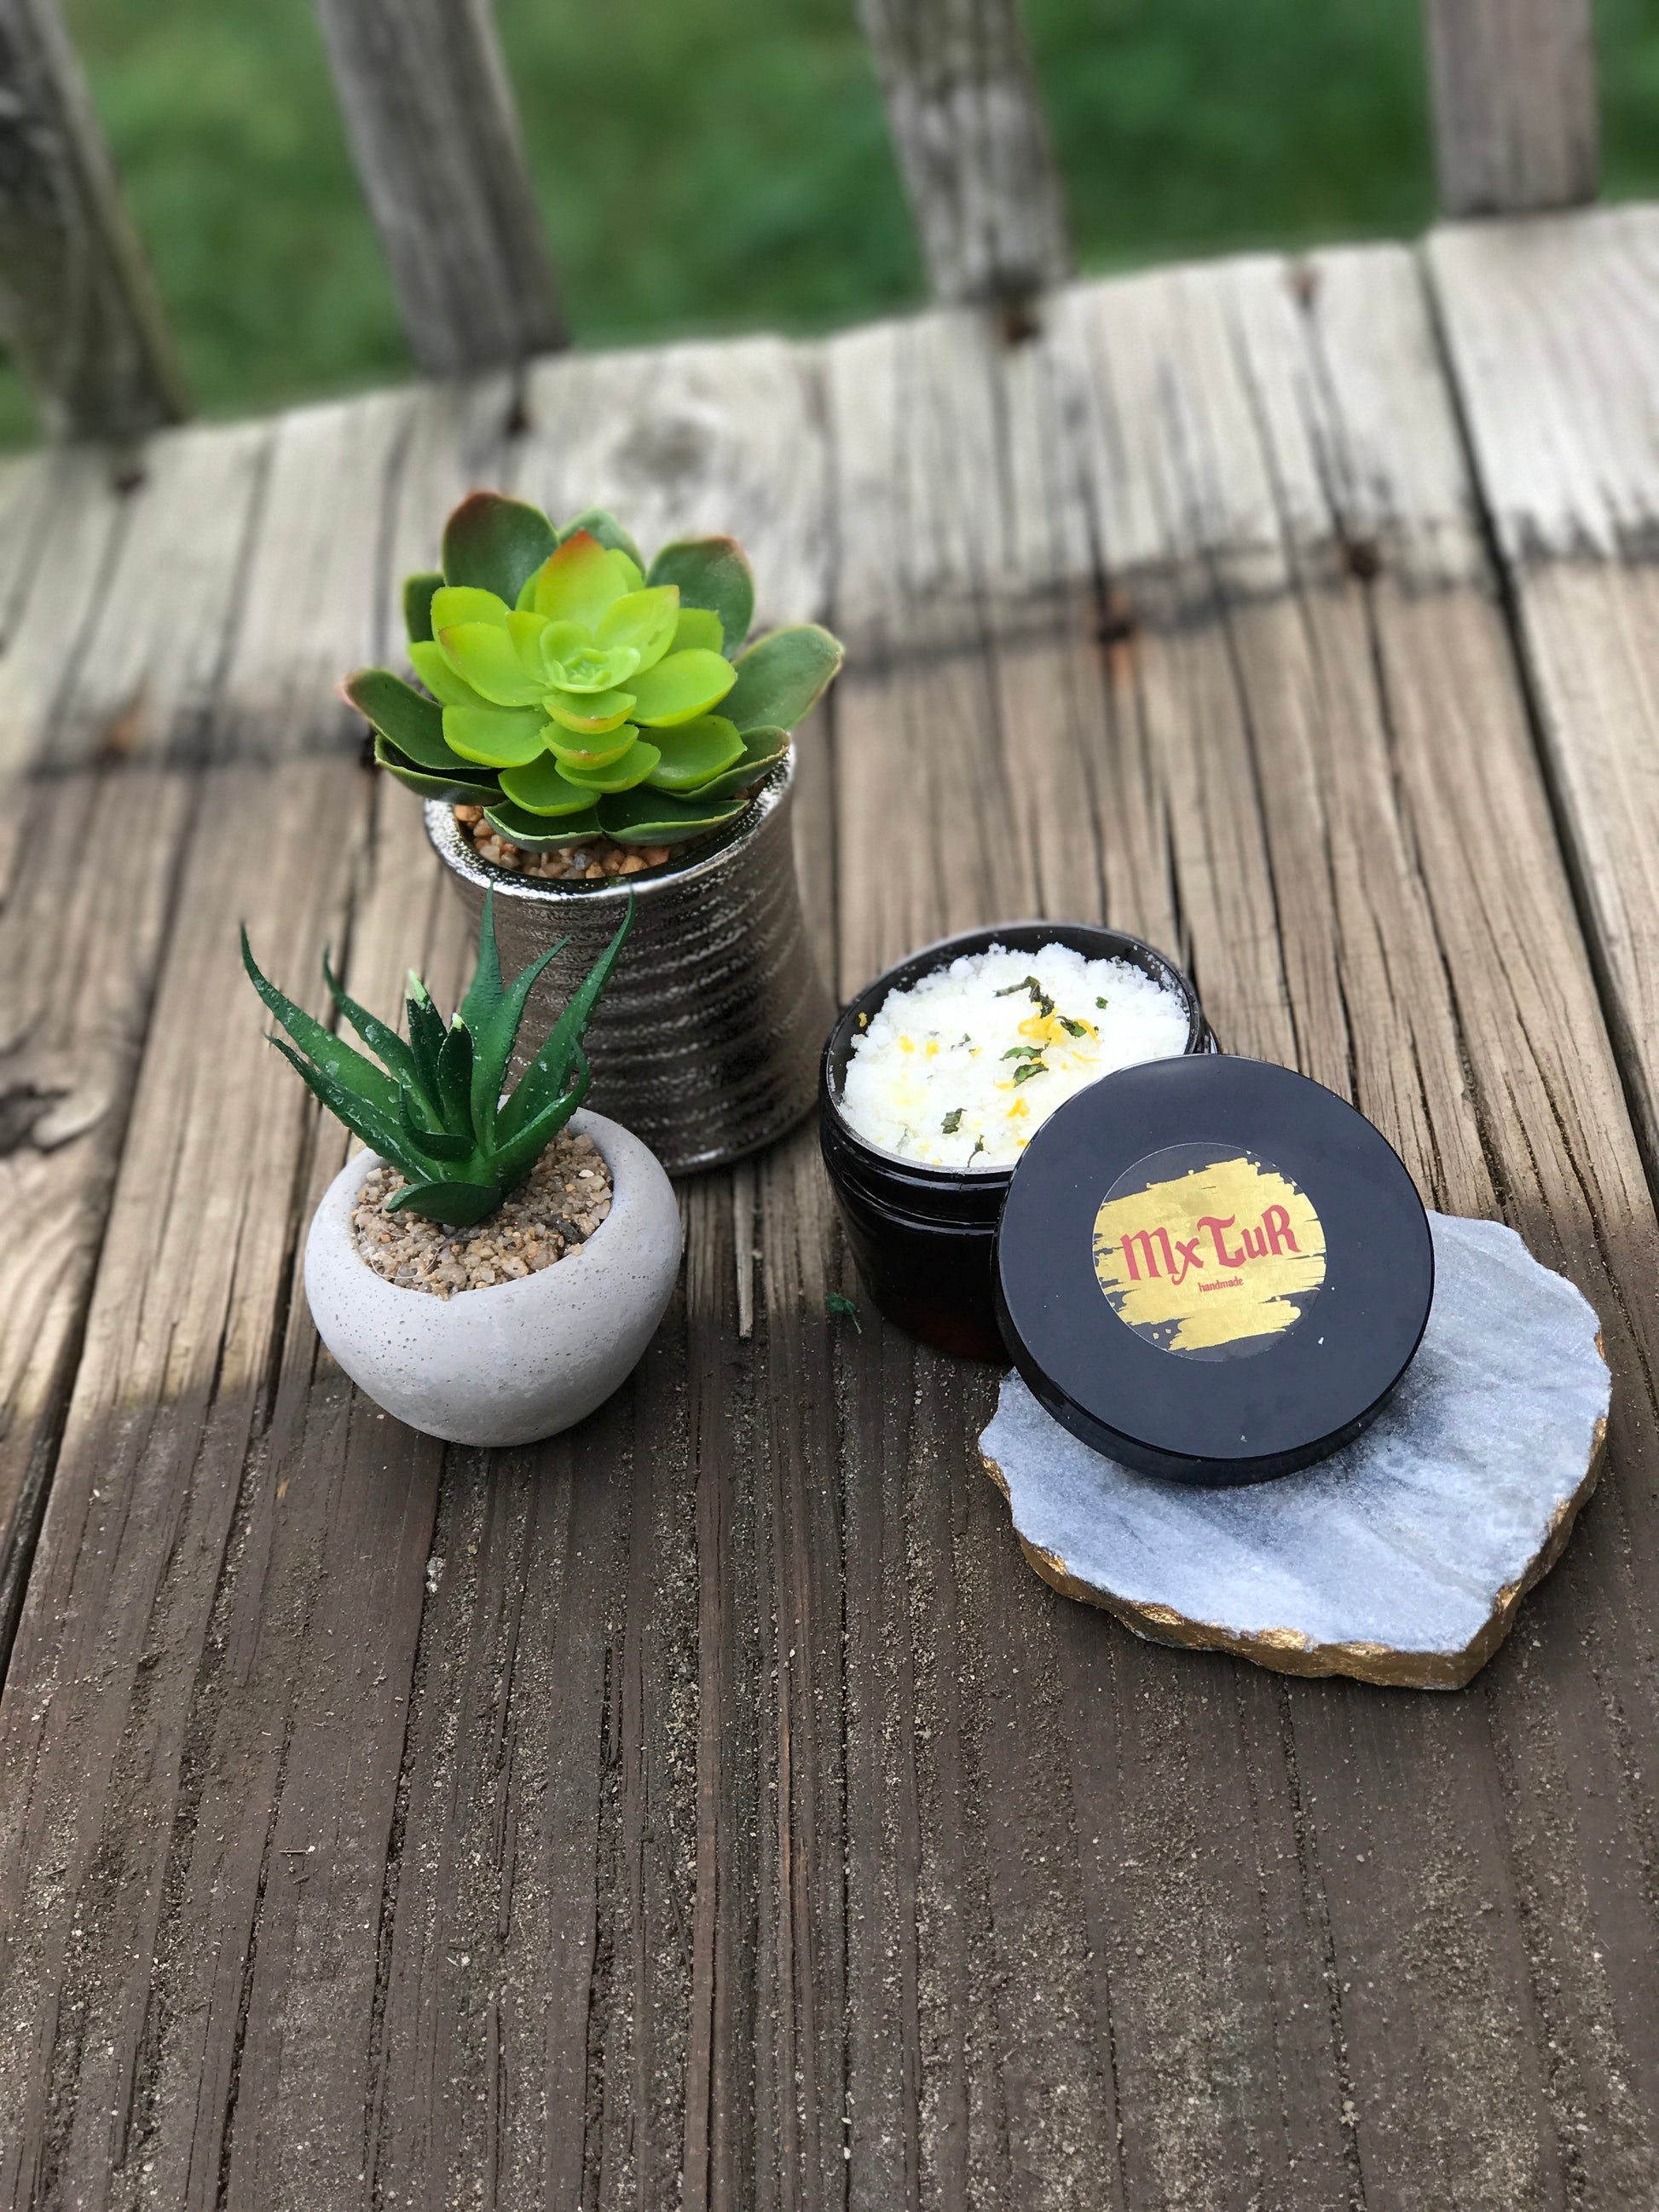 L&M (Lemon and Mint) Face & Body Scrub -Mixtur,  L&M (Lemon and Mint) Face & Body Scrub Mxtur, Face & Body Scrub Masks, Scrubs, Soaps, L&M (Lemon and Mint) Face & Body Scrub skincare, L&M (Lemon and Mint) Face & Body Scrub natural, [product_Type] Handcrafted